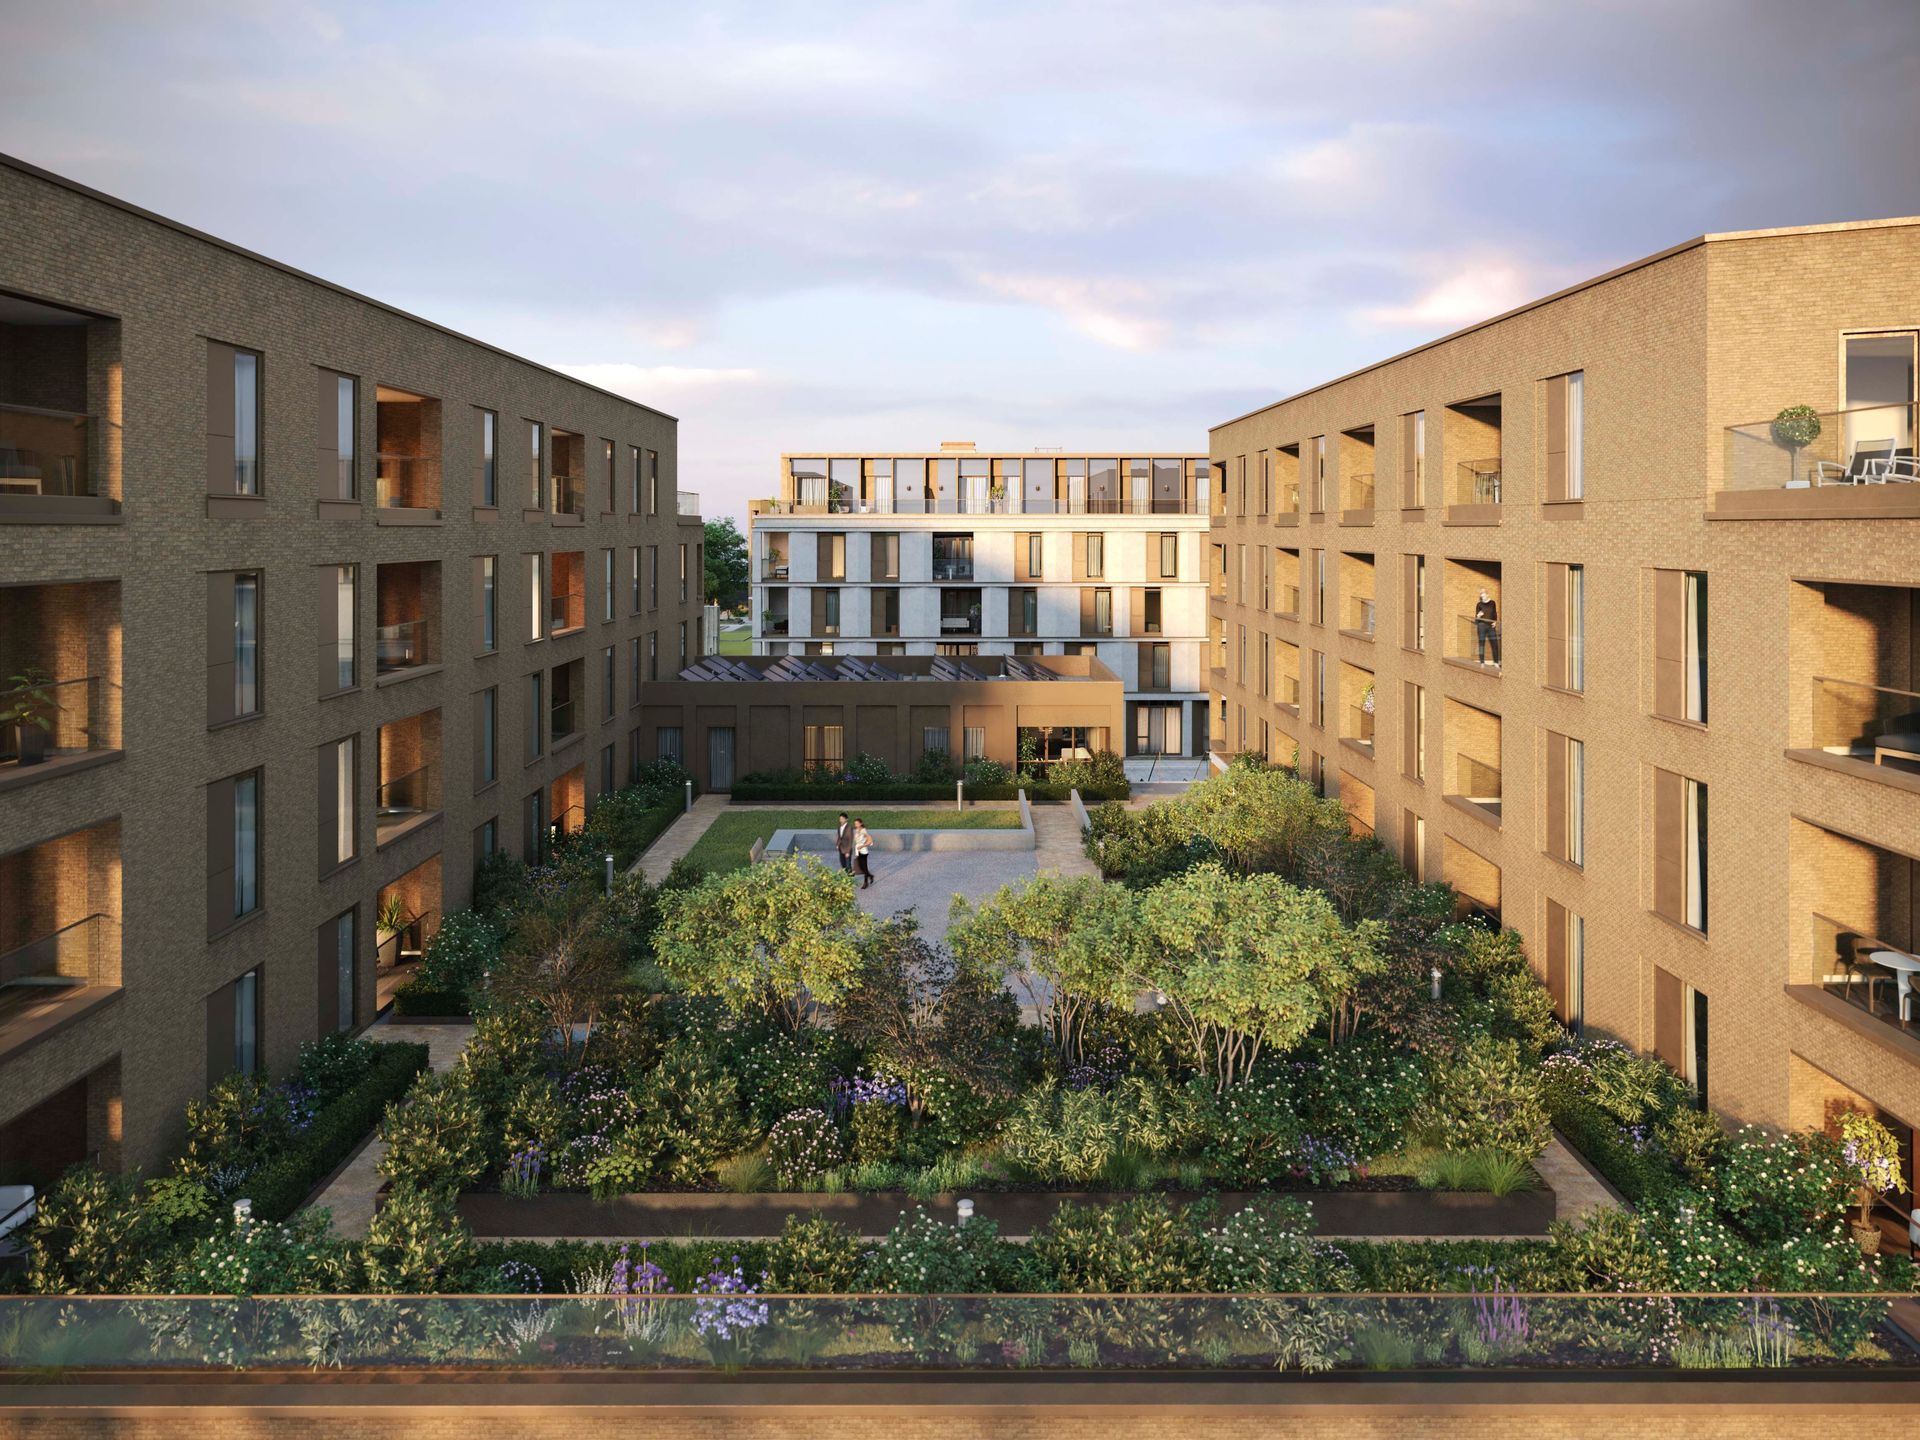 An artist 's impression of a large apartment building with a garden in the middle at Walton Court.